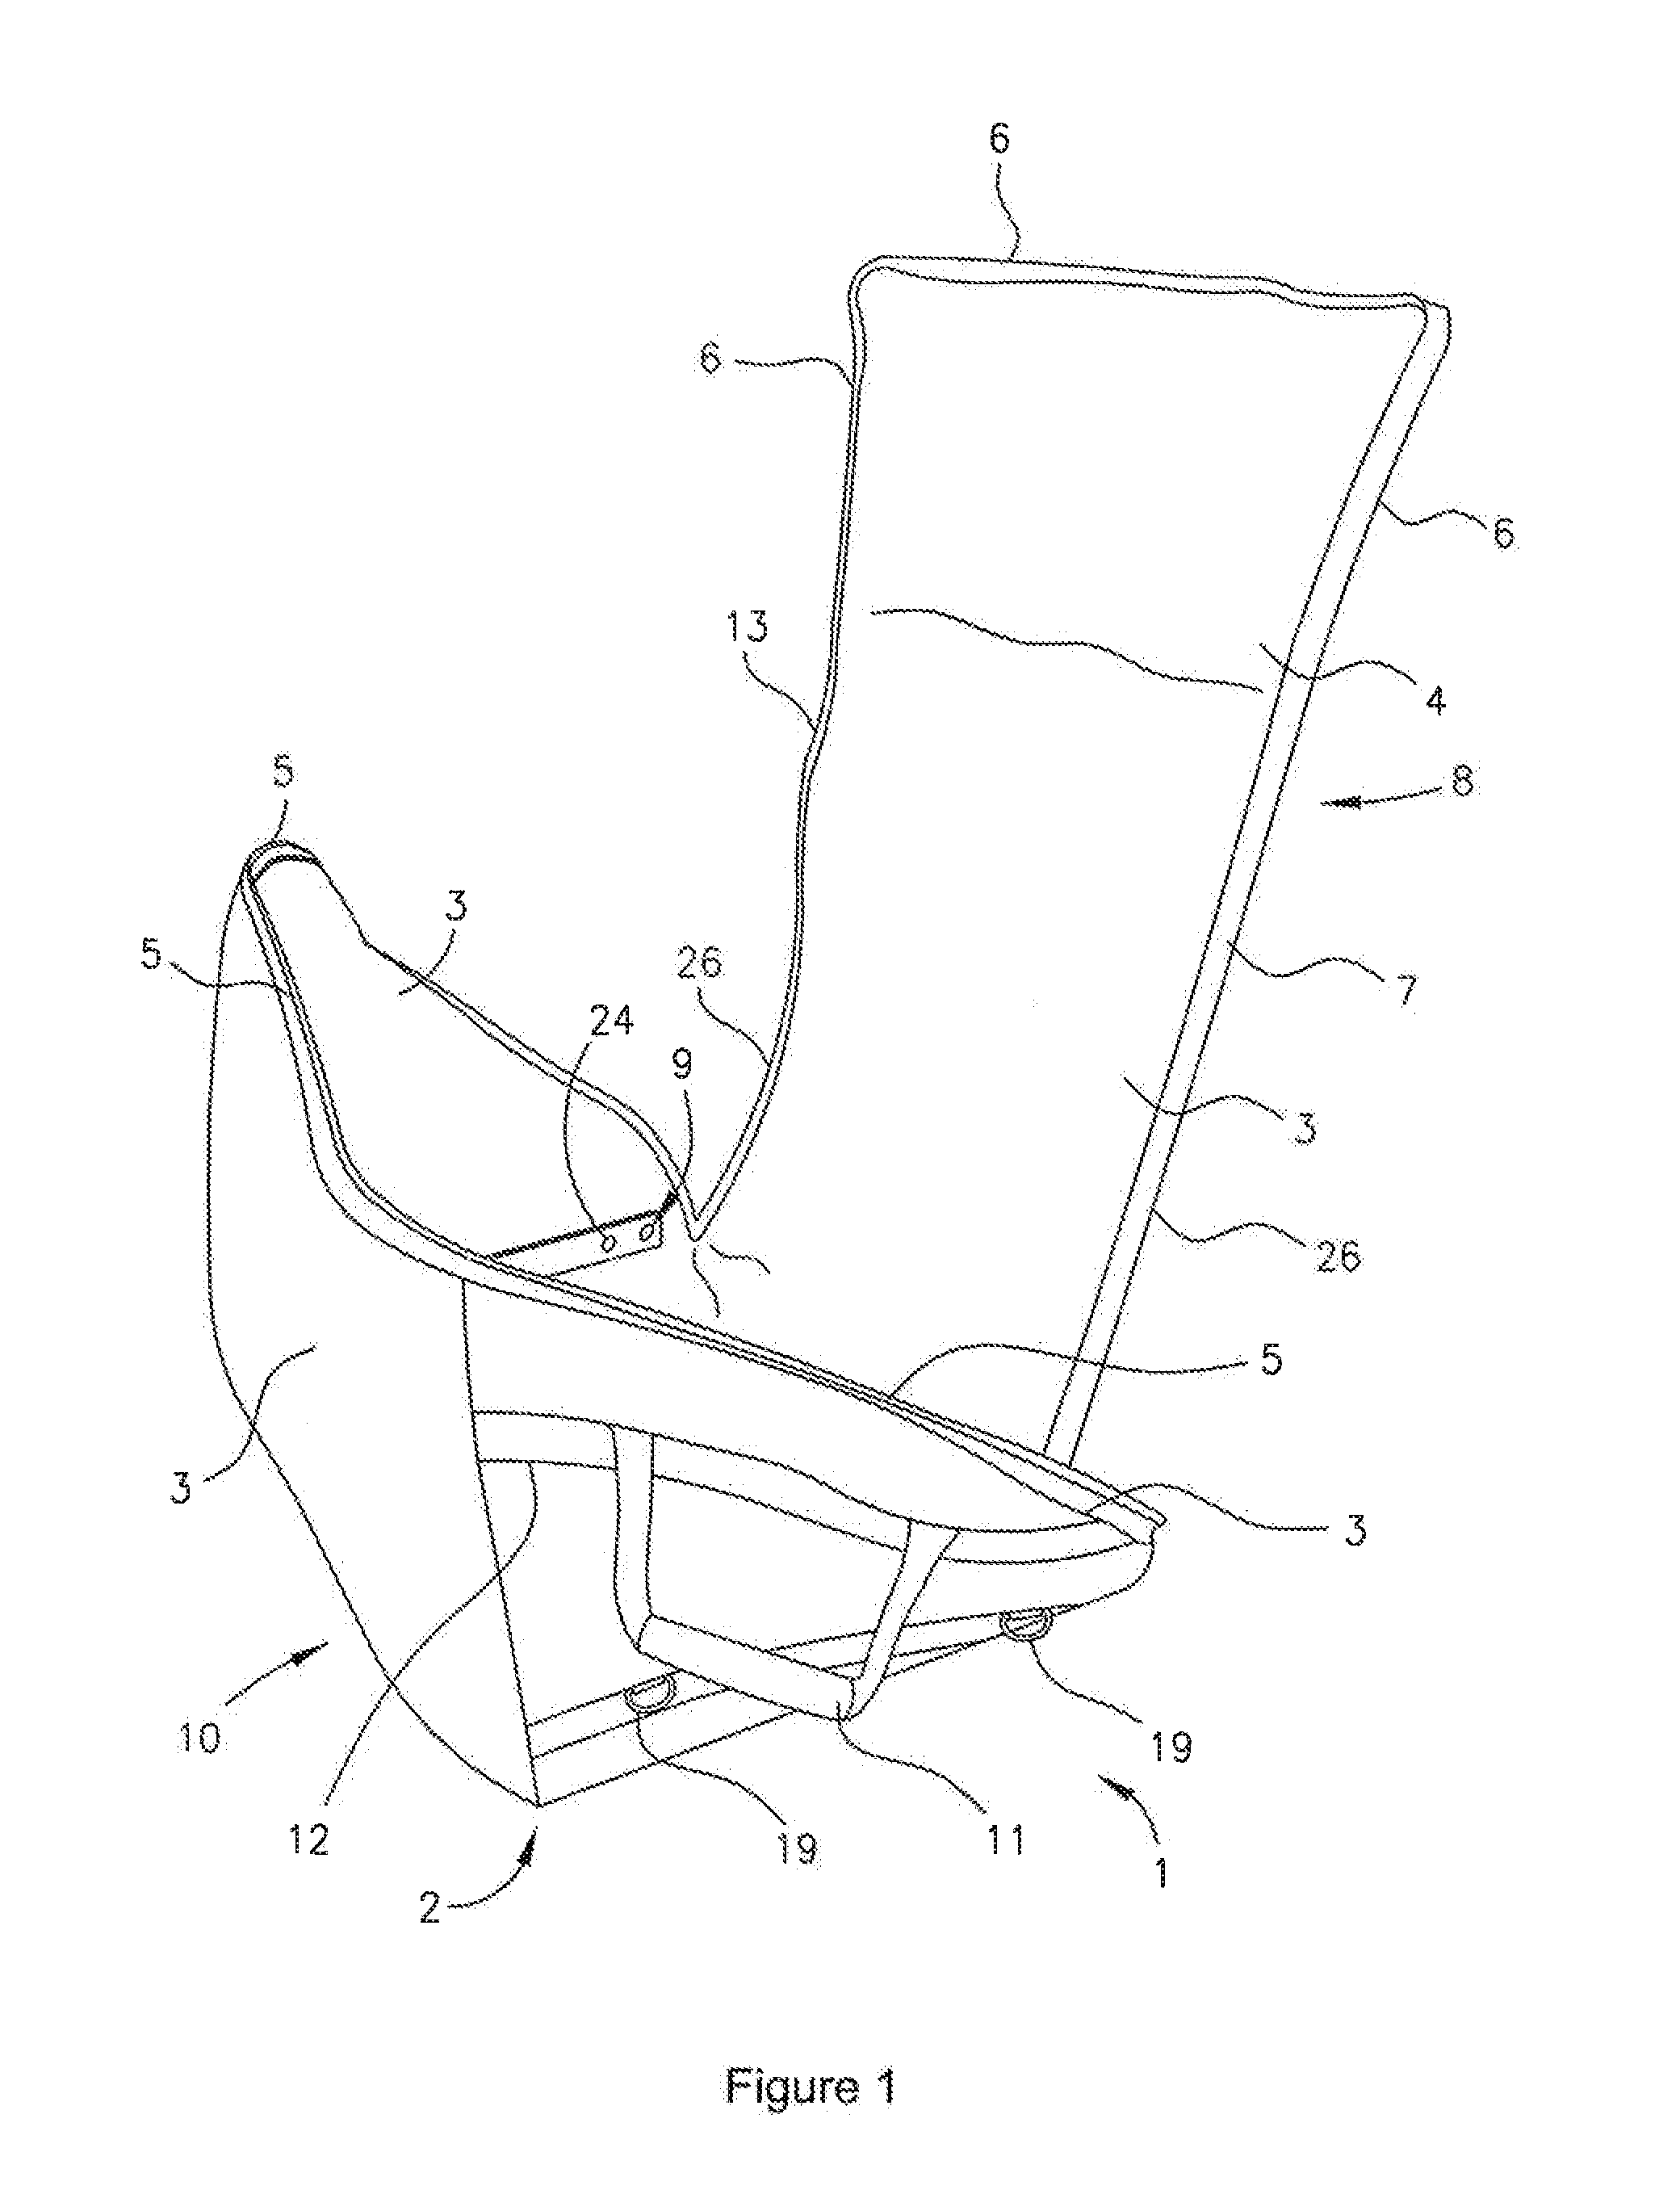 Travel Container for Transporting Of Beverage Containers